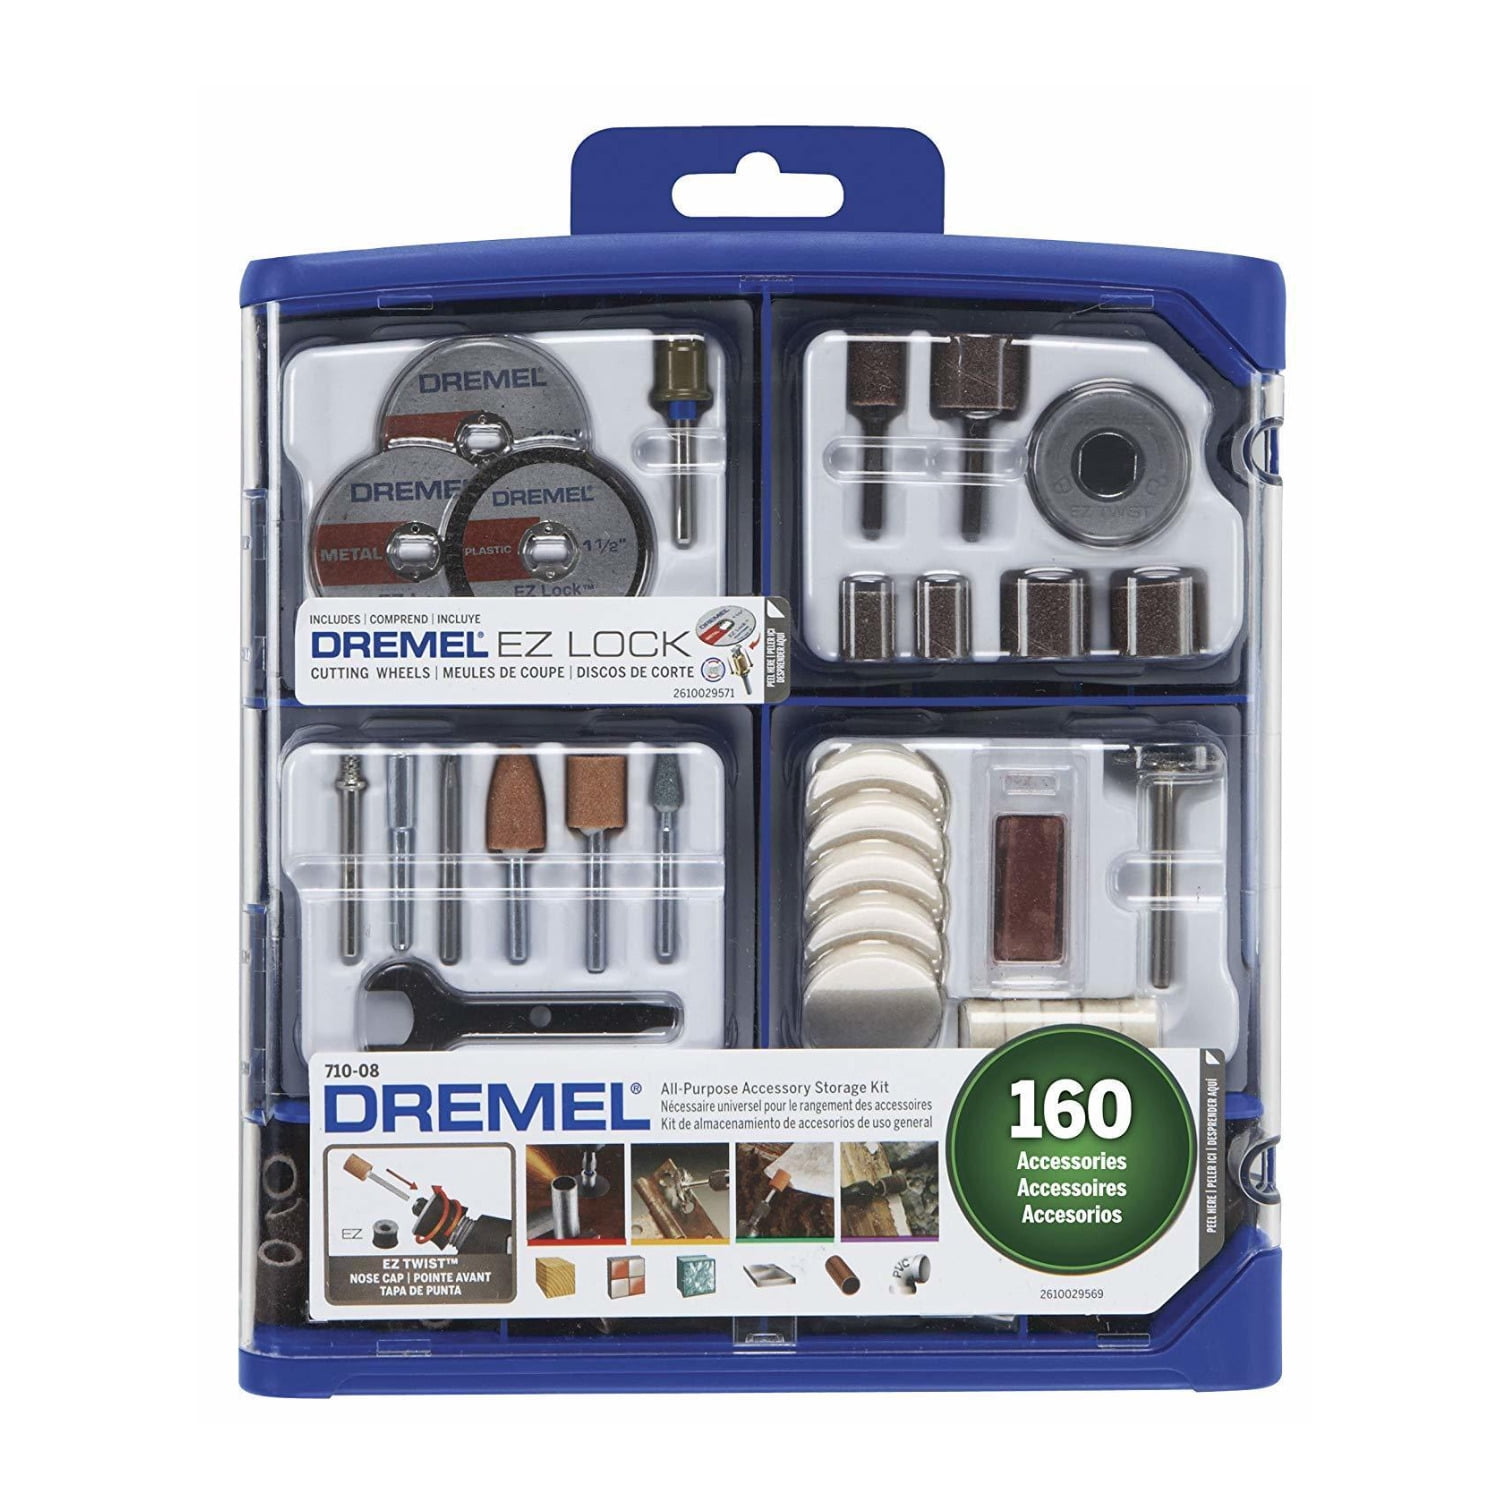 Dremel 8220-2/28 Cordless Rotary Tool Kit, 2 attachments/28 accessories